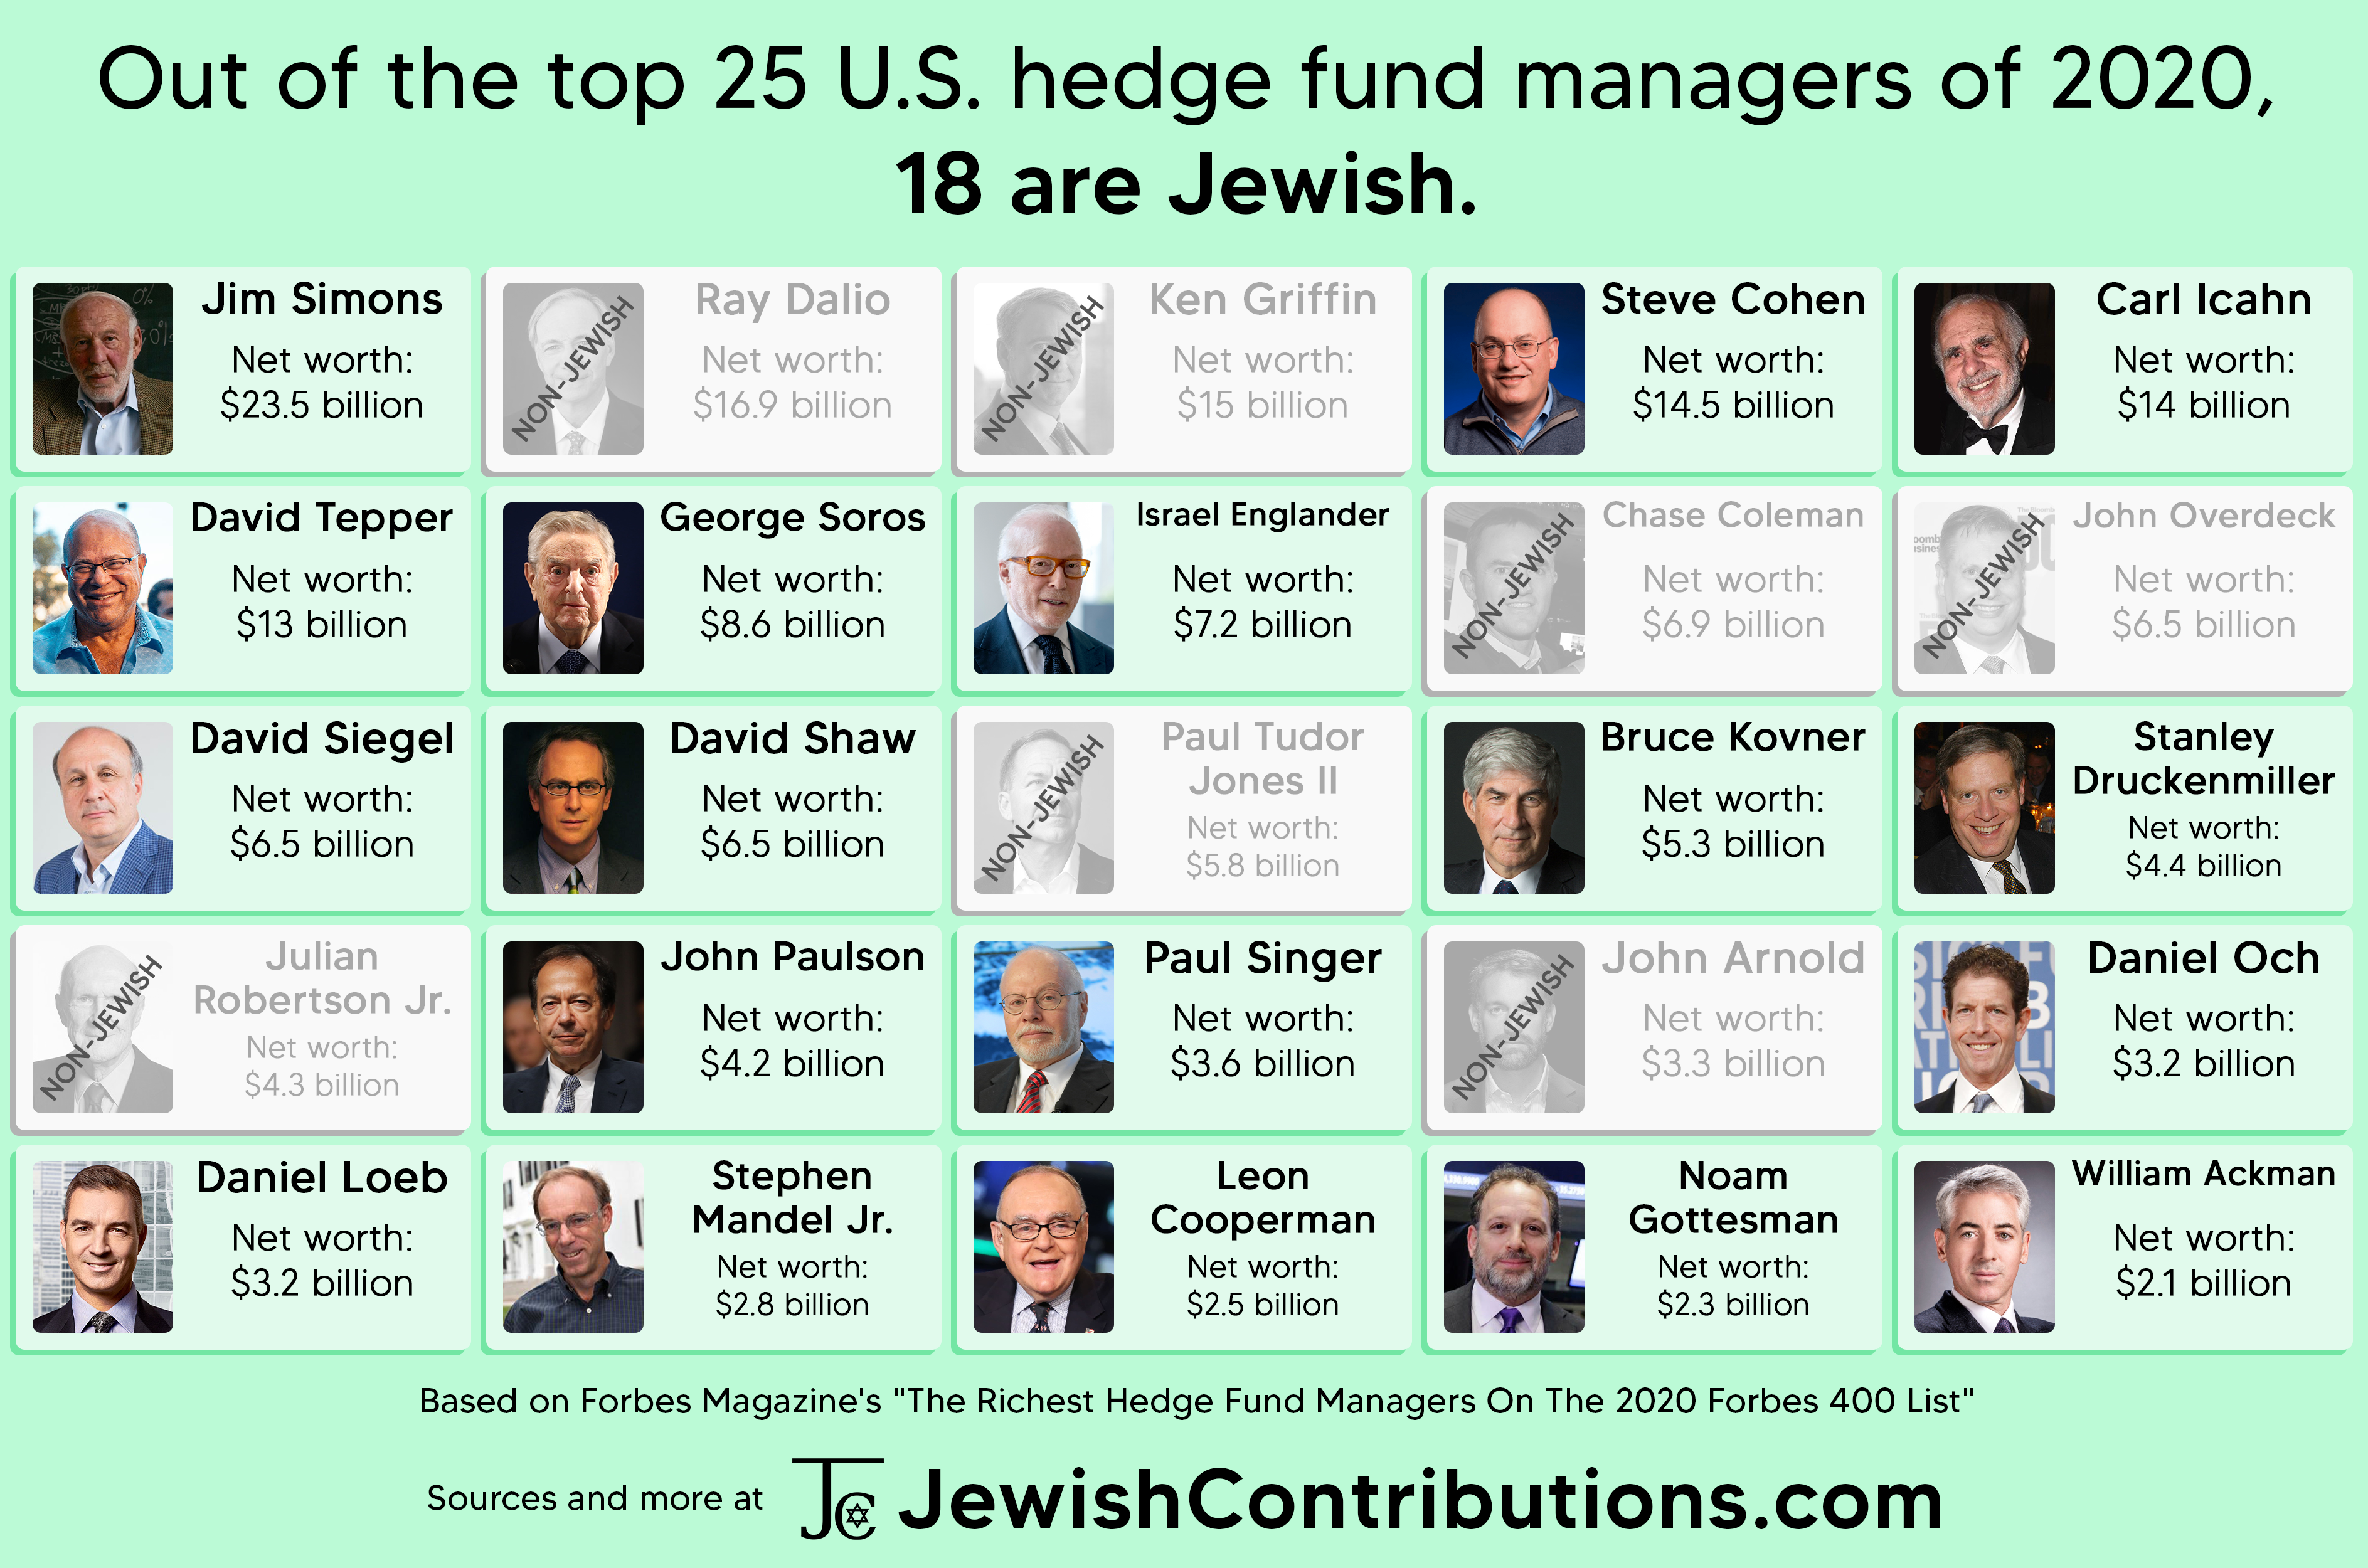 Out of the top 25 U.S. hedge fund managers of 2020, 18 are Jewish.